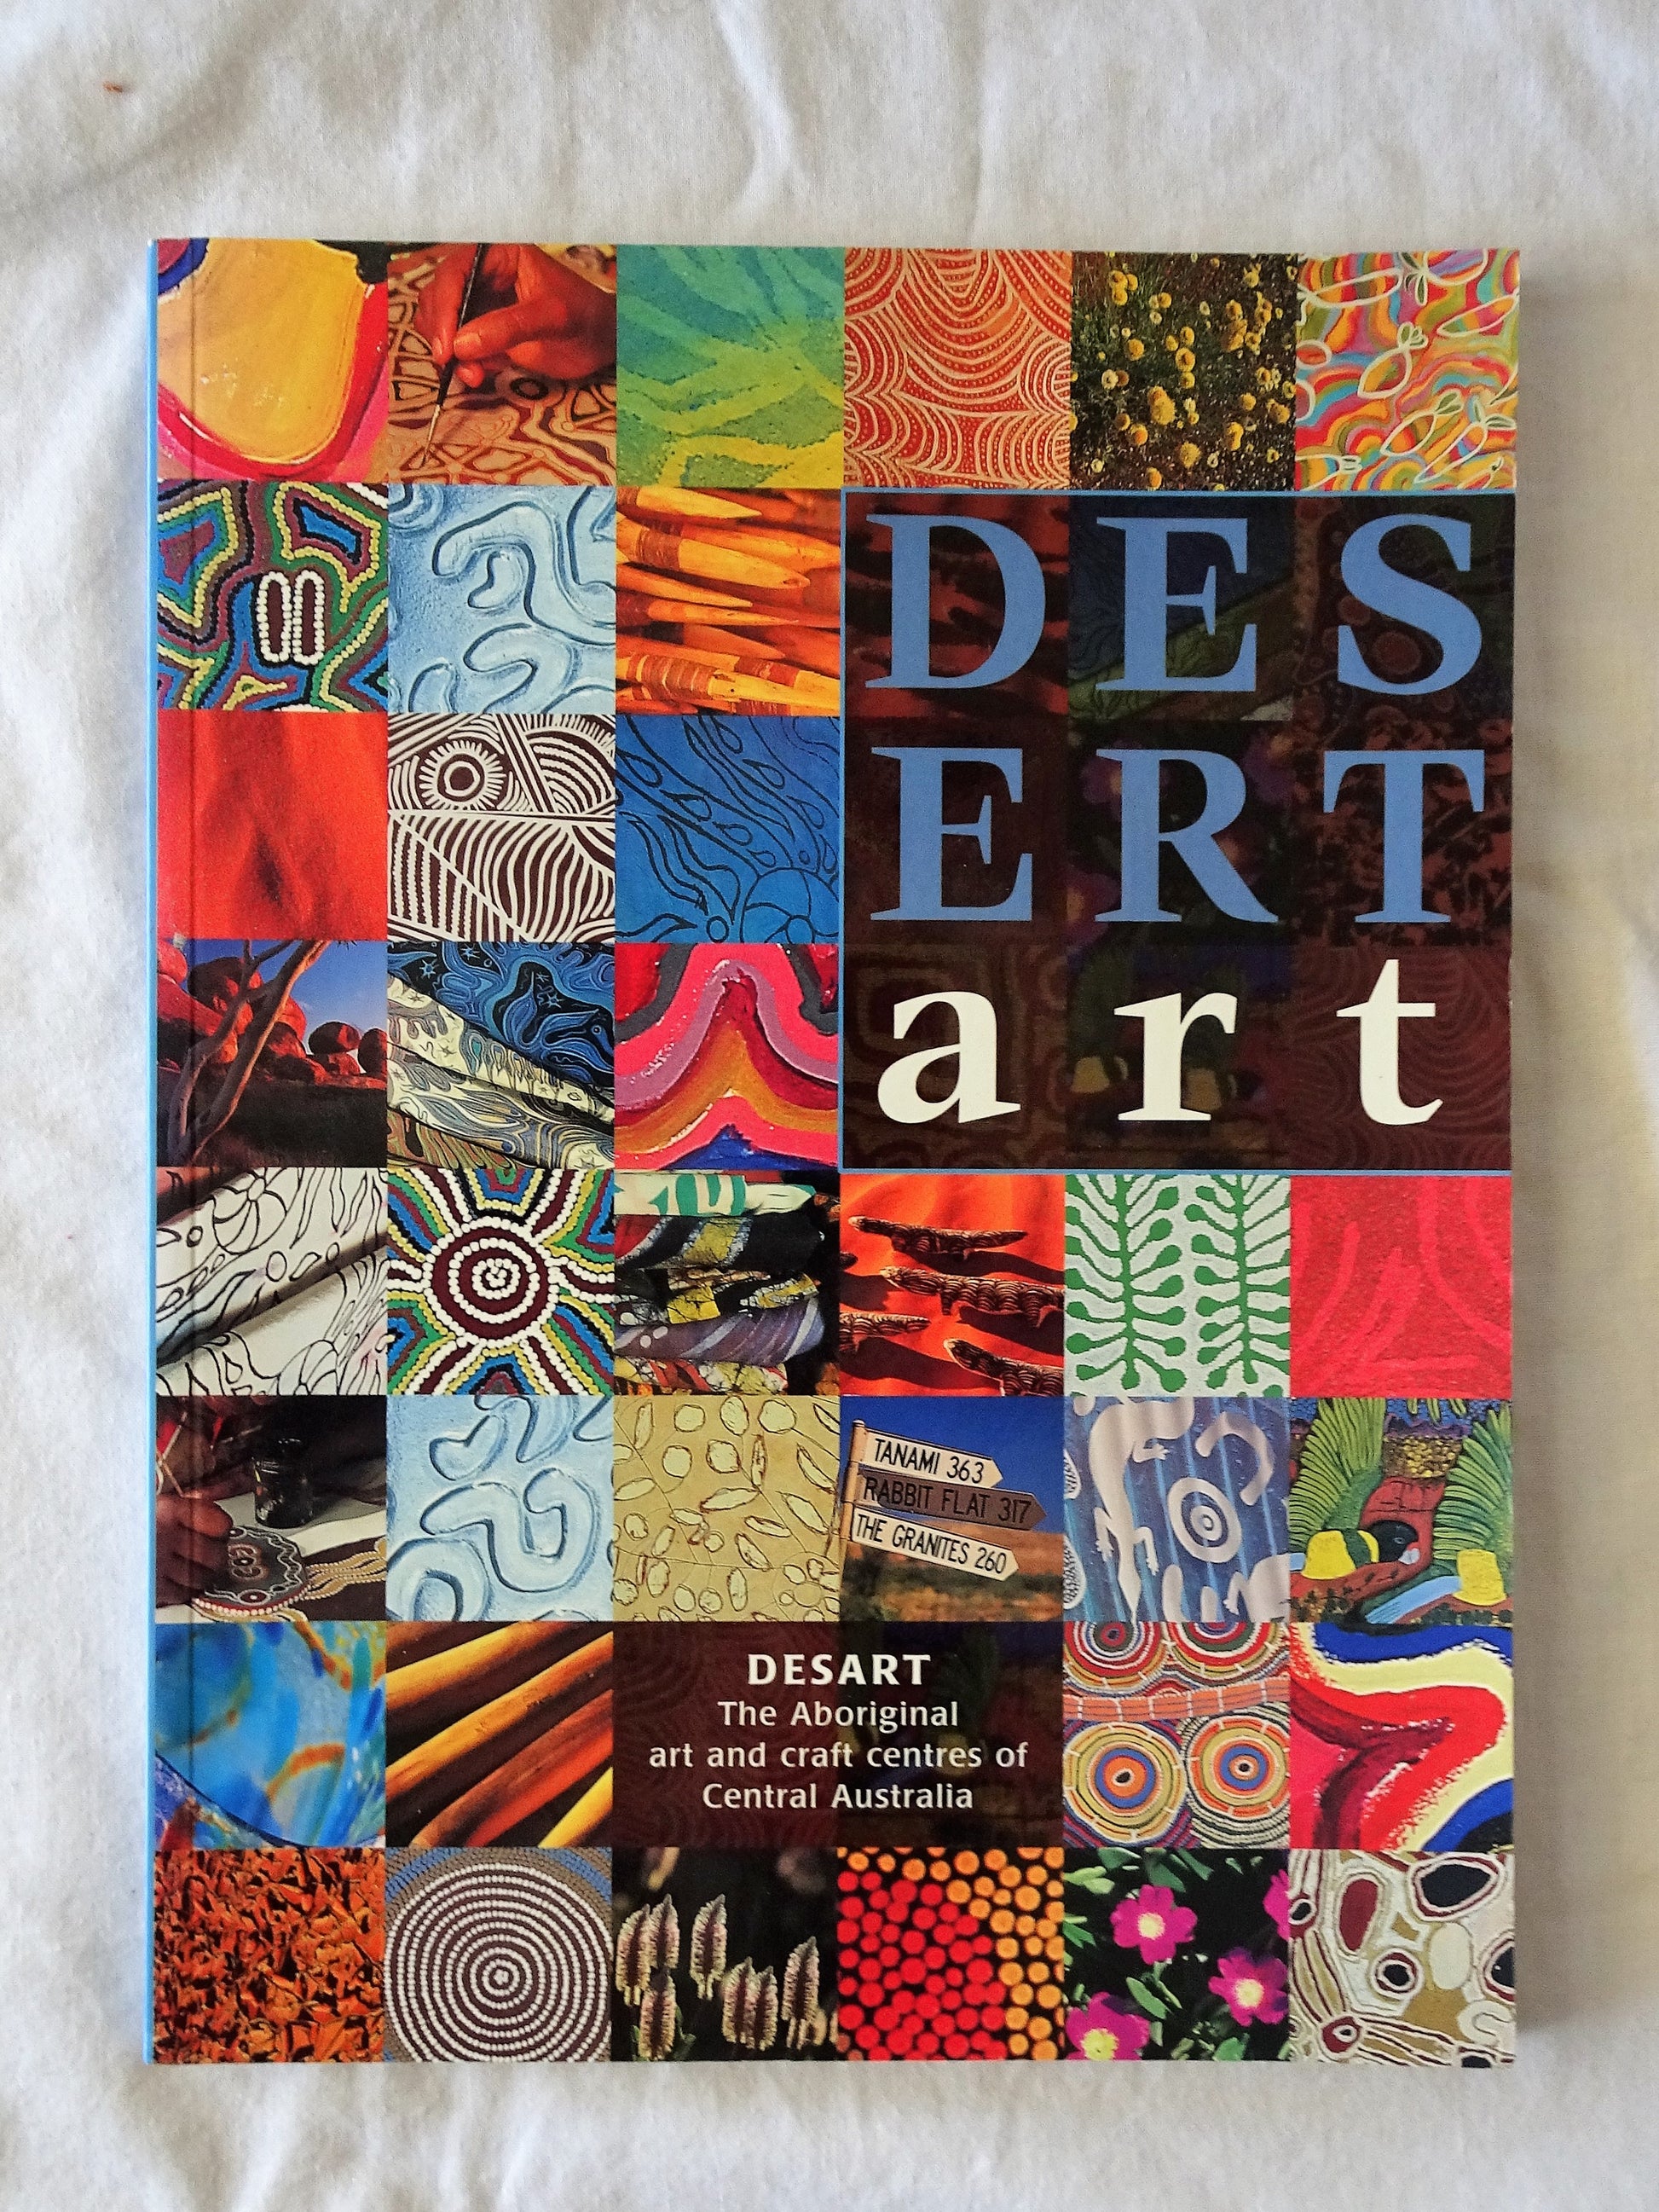 Desert Art  The Desart Directory of Central Australian Aboriginal Art and Craft Centres  Compiled by Mary-Lou Nugent